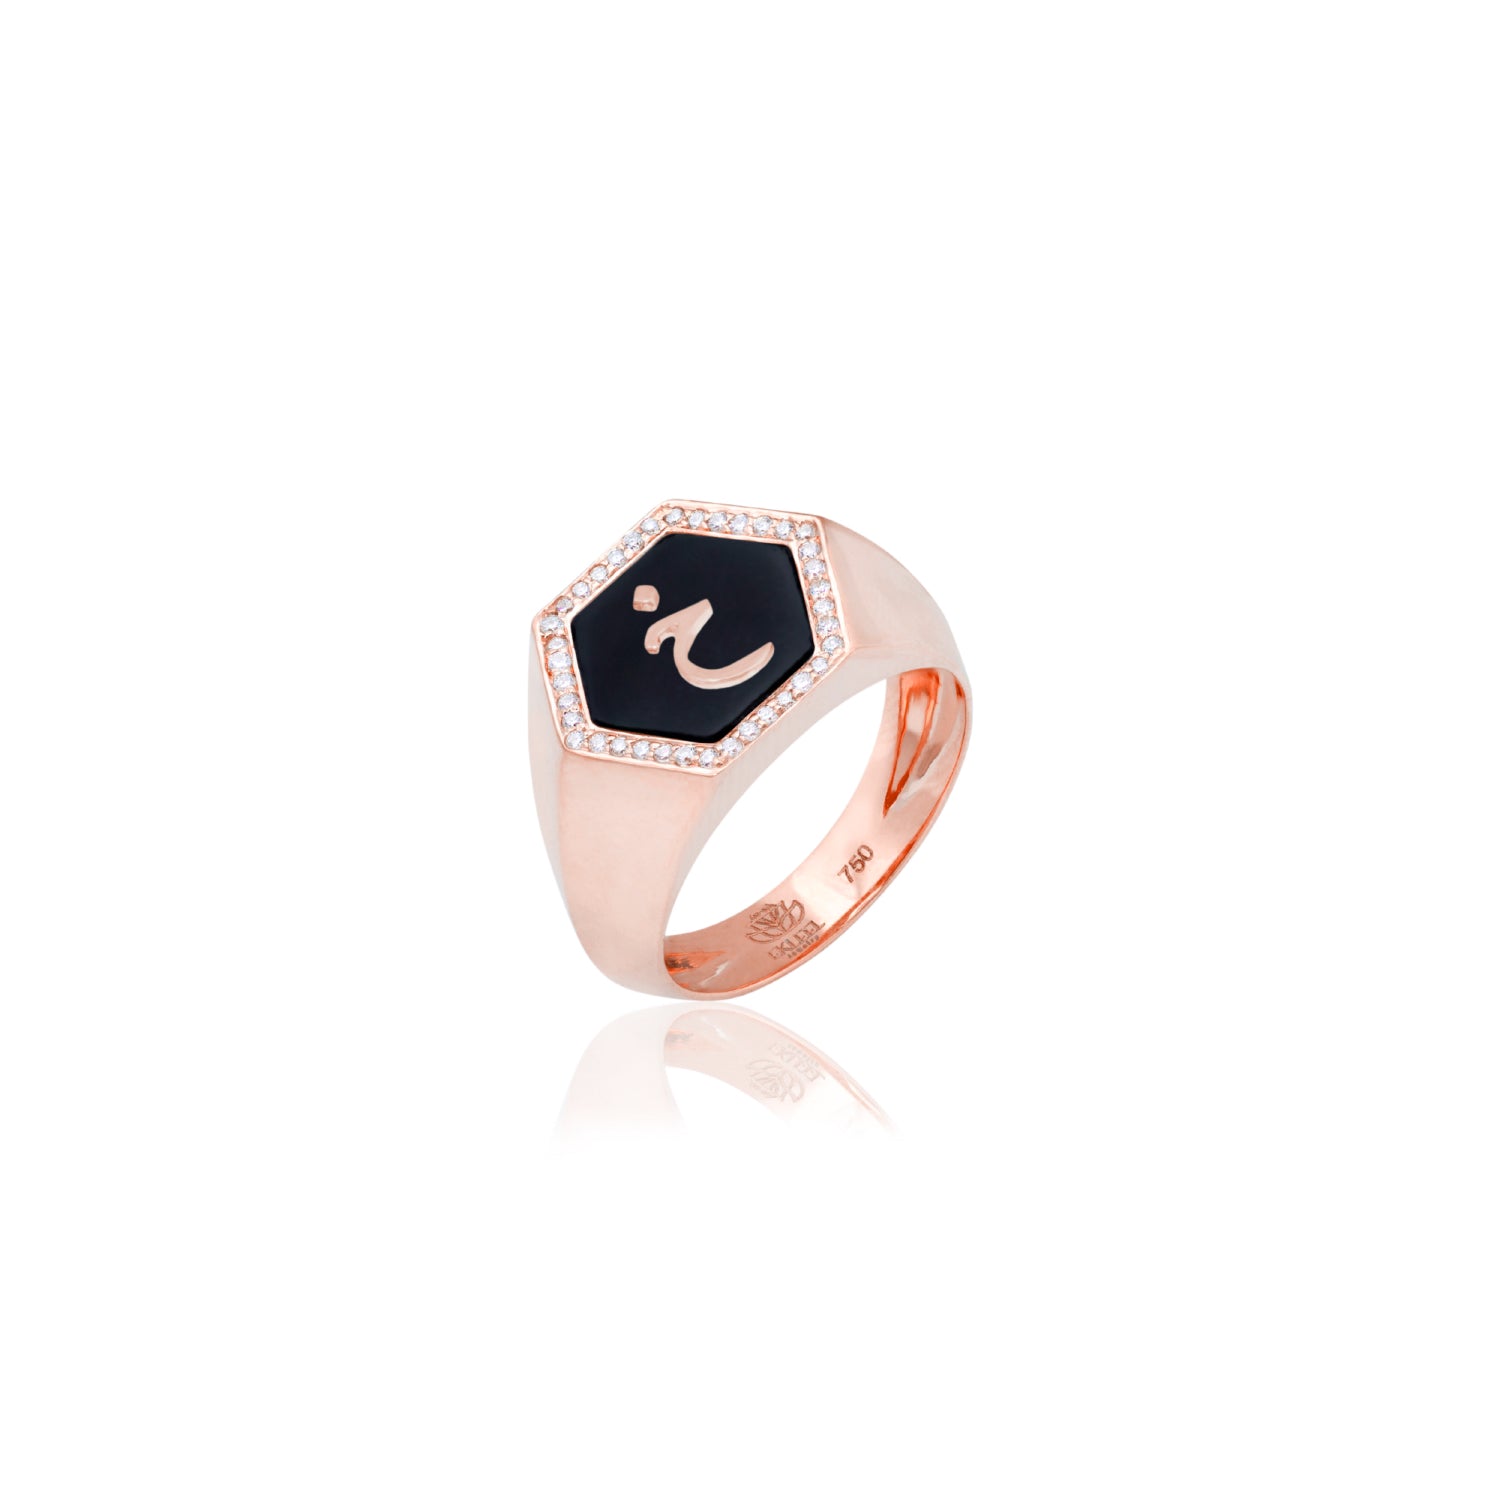 Qamoos 2.0 Letter خ Onyx and Diamond Signet Ring in Rose Gold